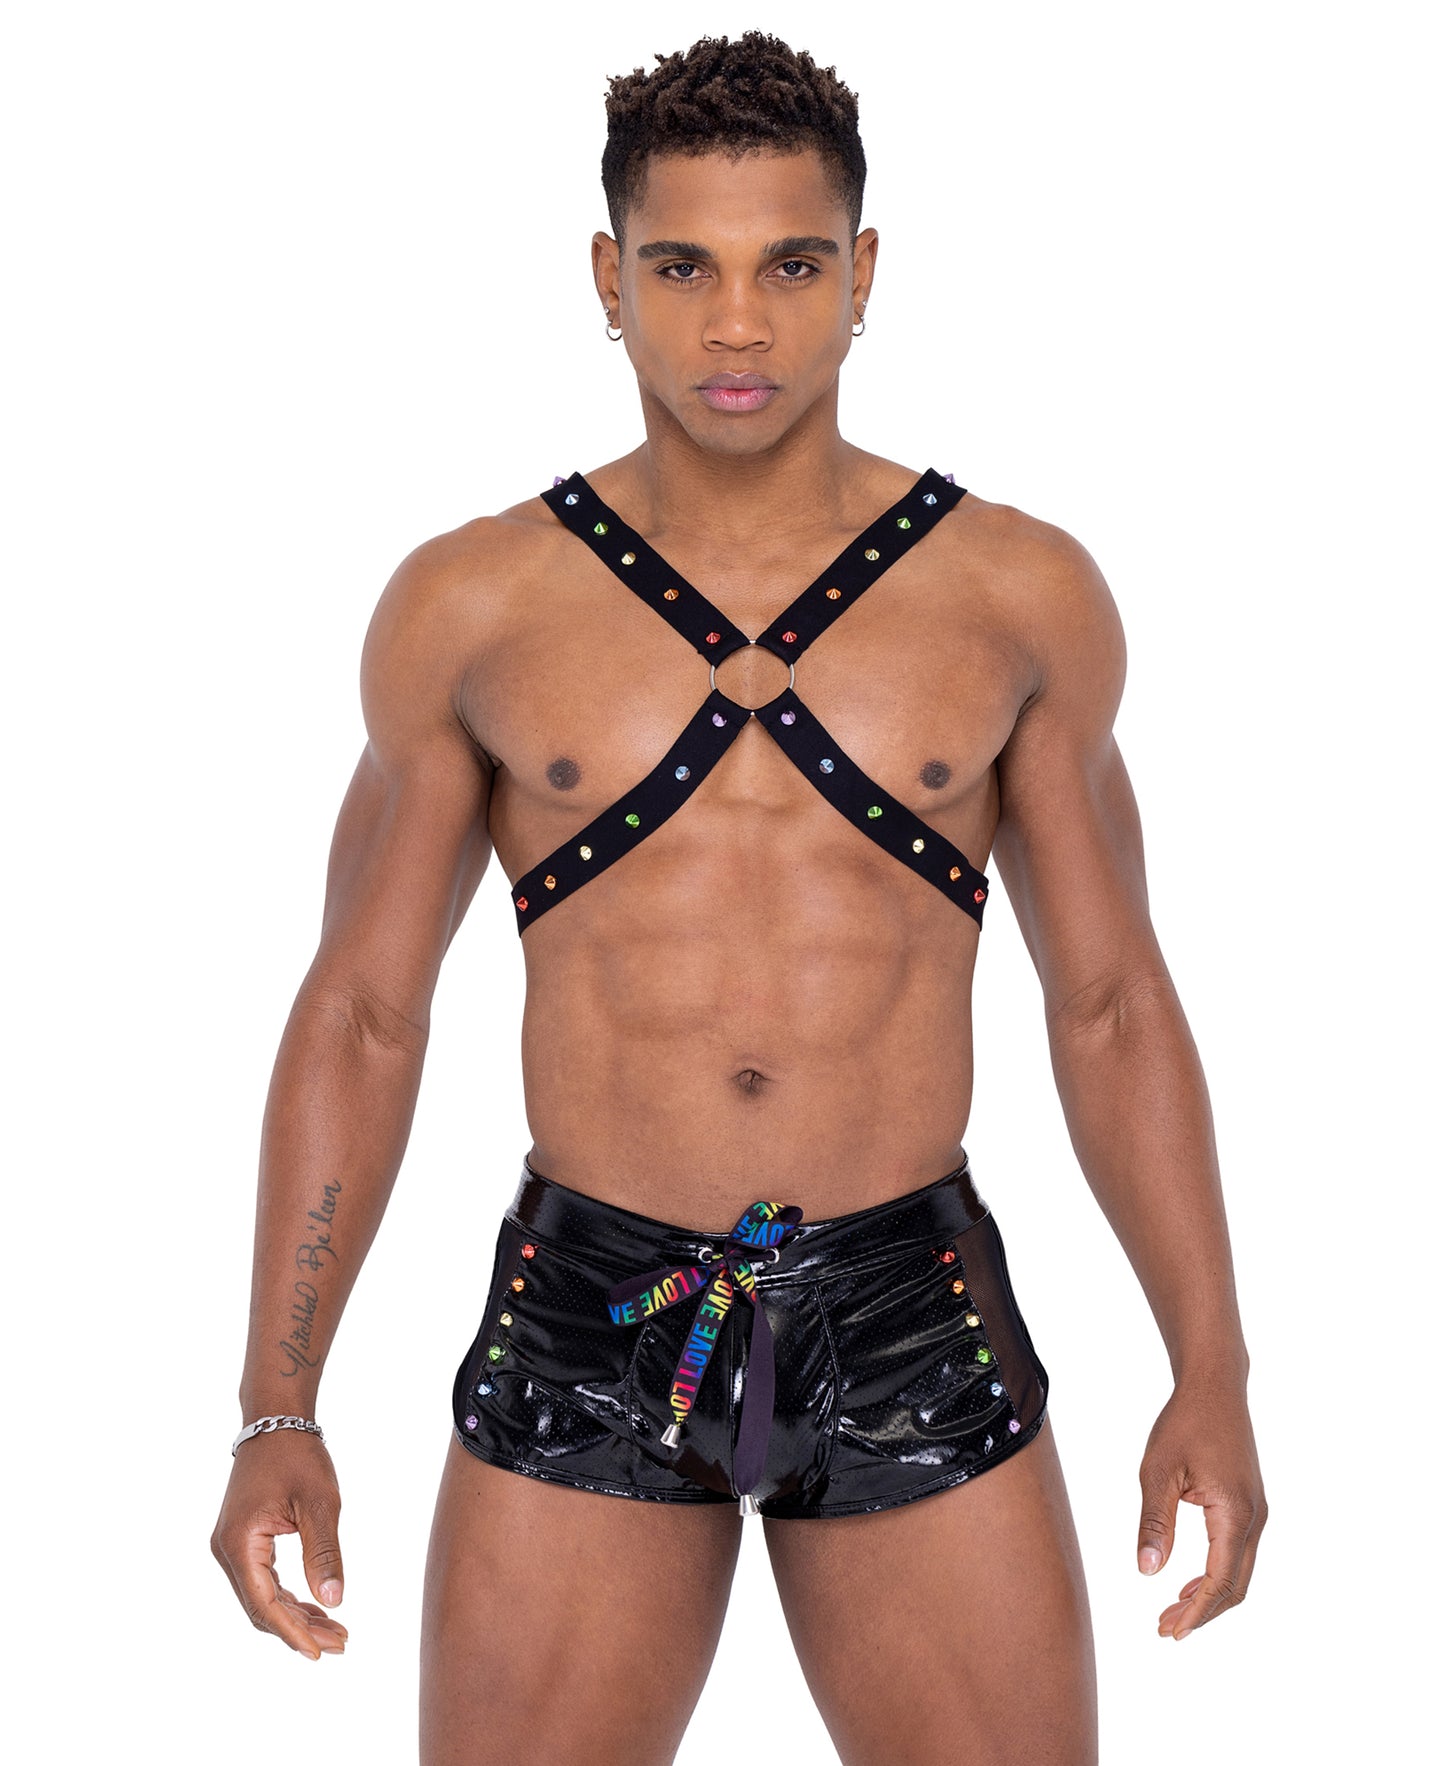 6337 Pride Harness with Rainbow Stud Detail Black front view pic 2